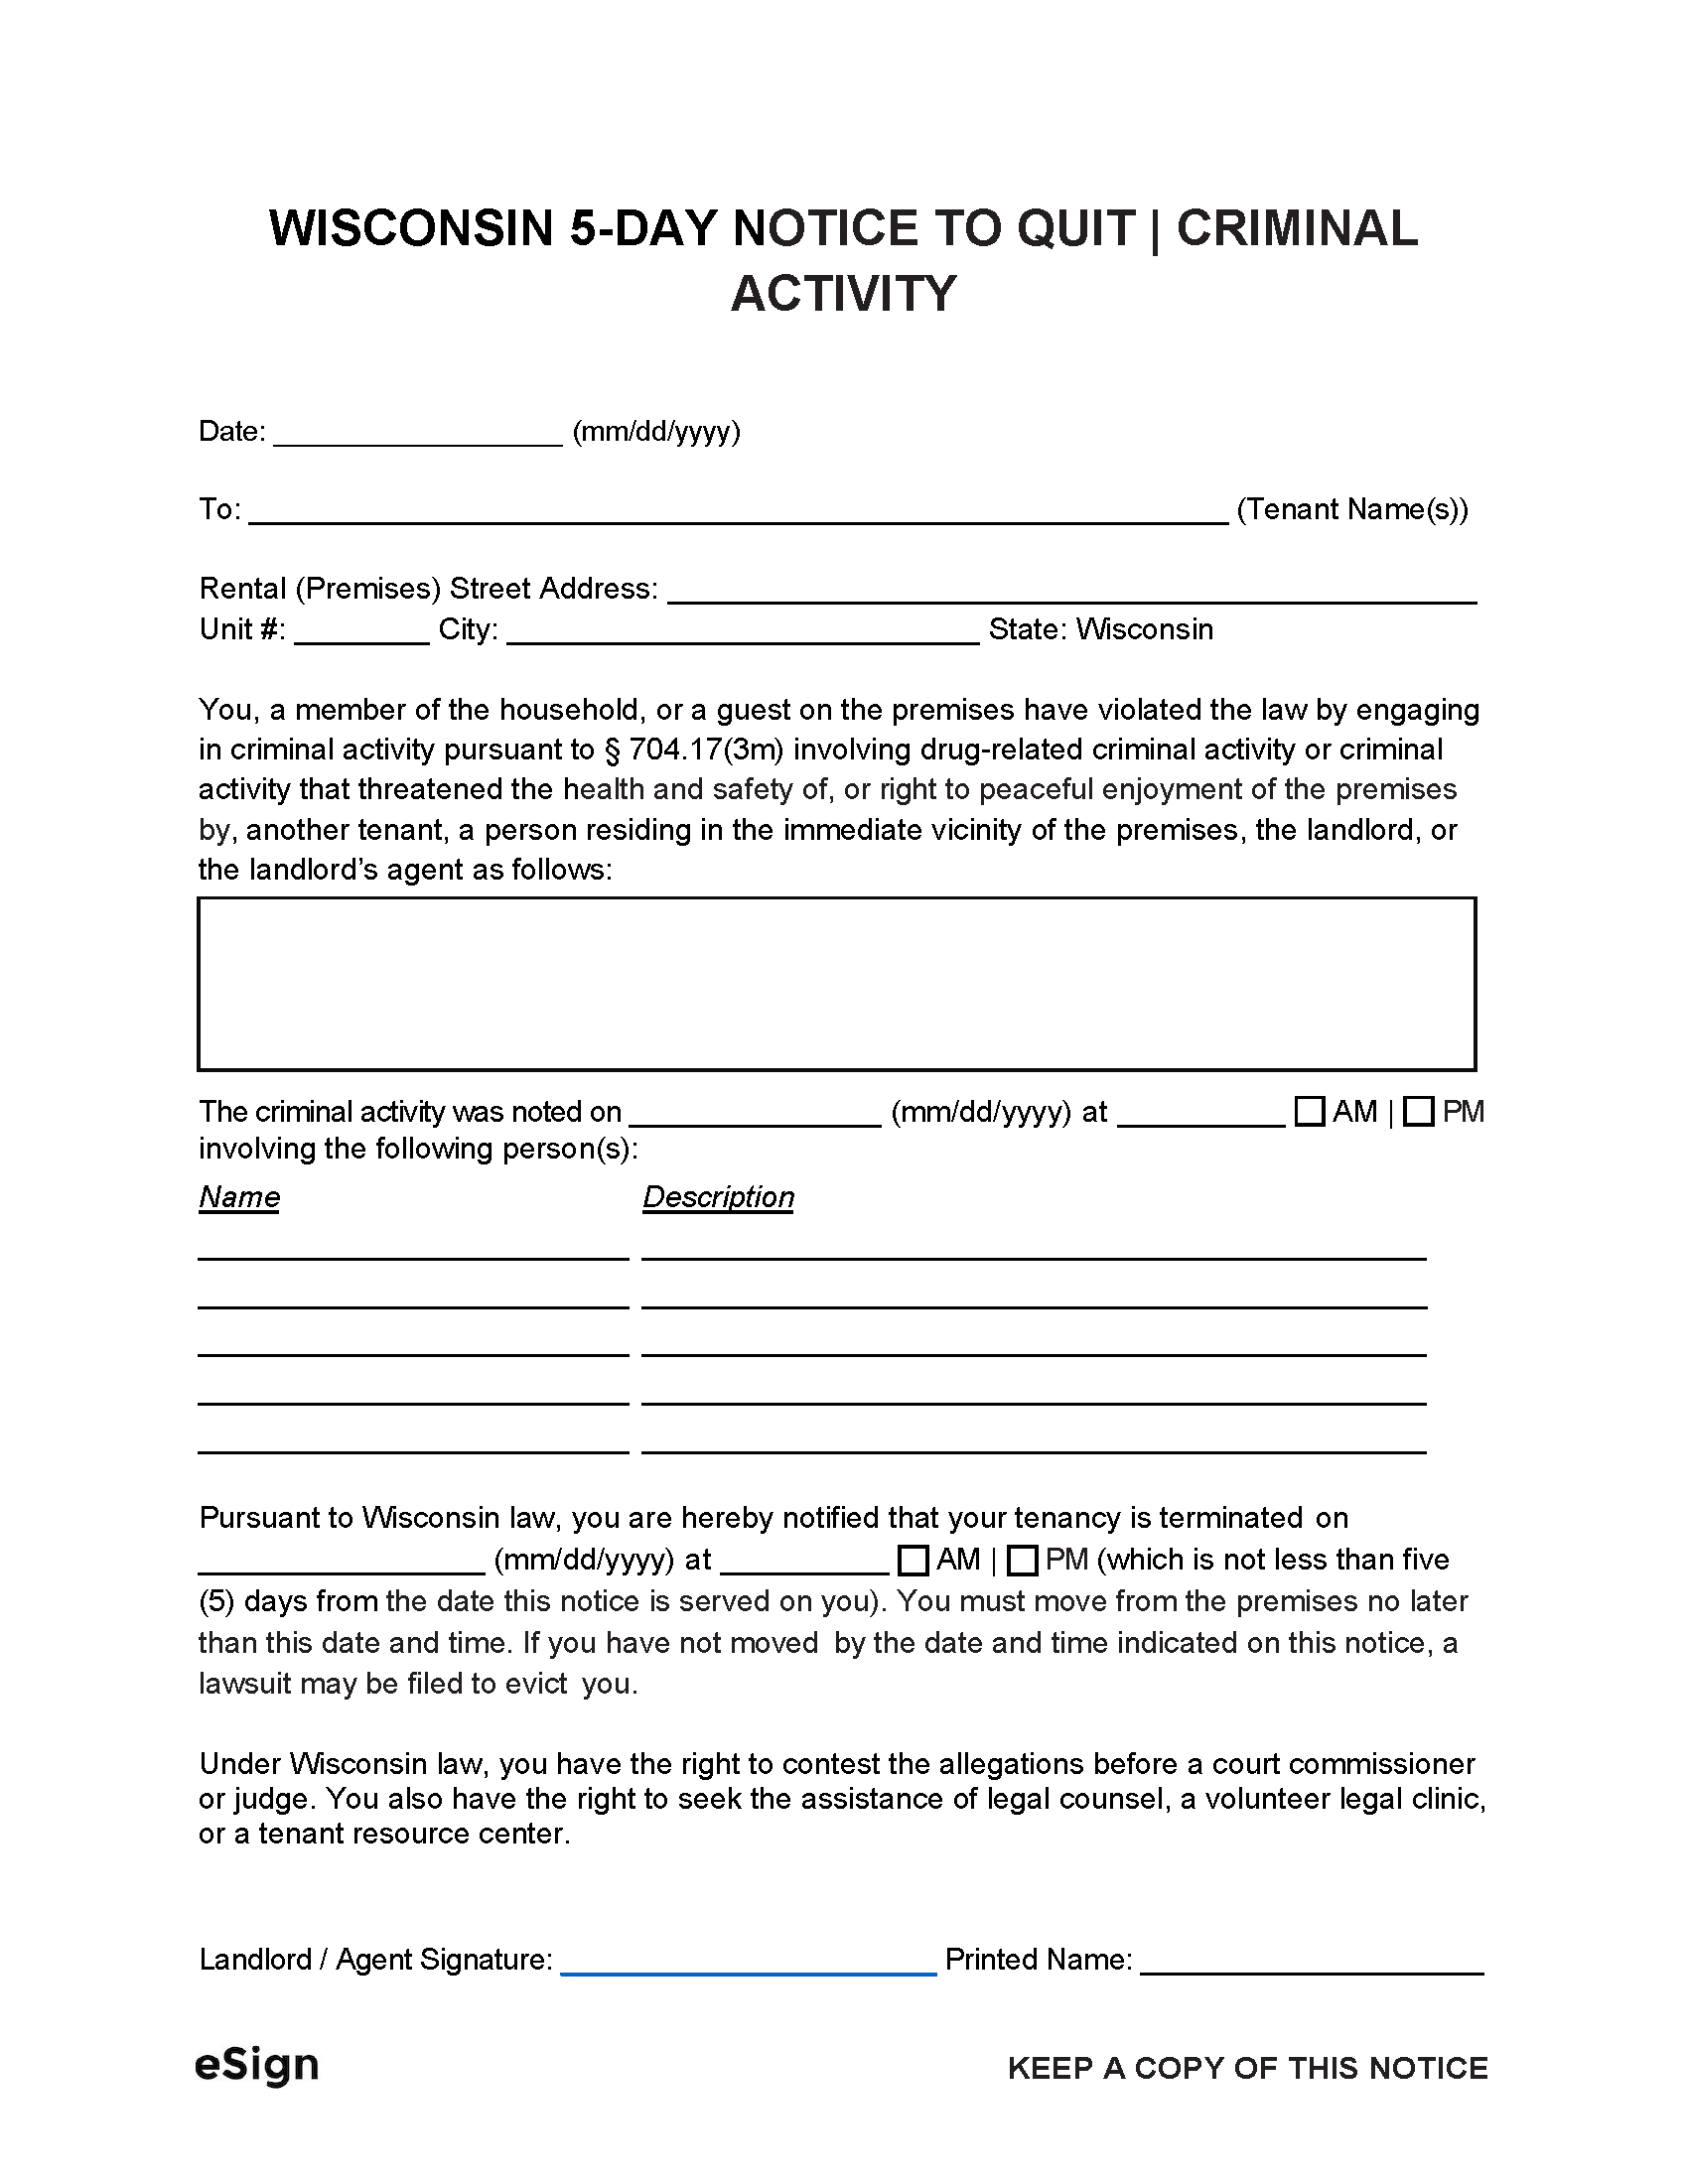 free-wisconsin-5-day-notice-to-quit-criminal-activity-pdf-word